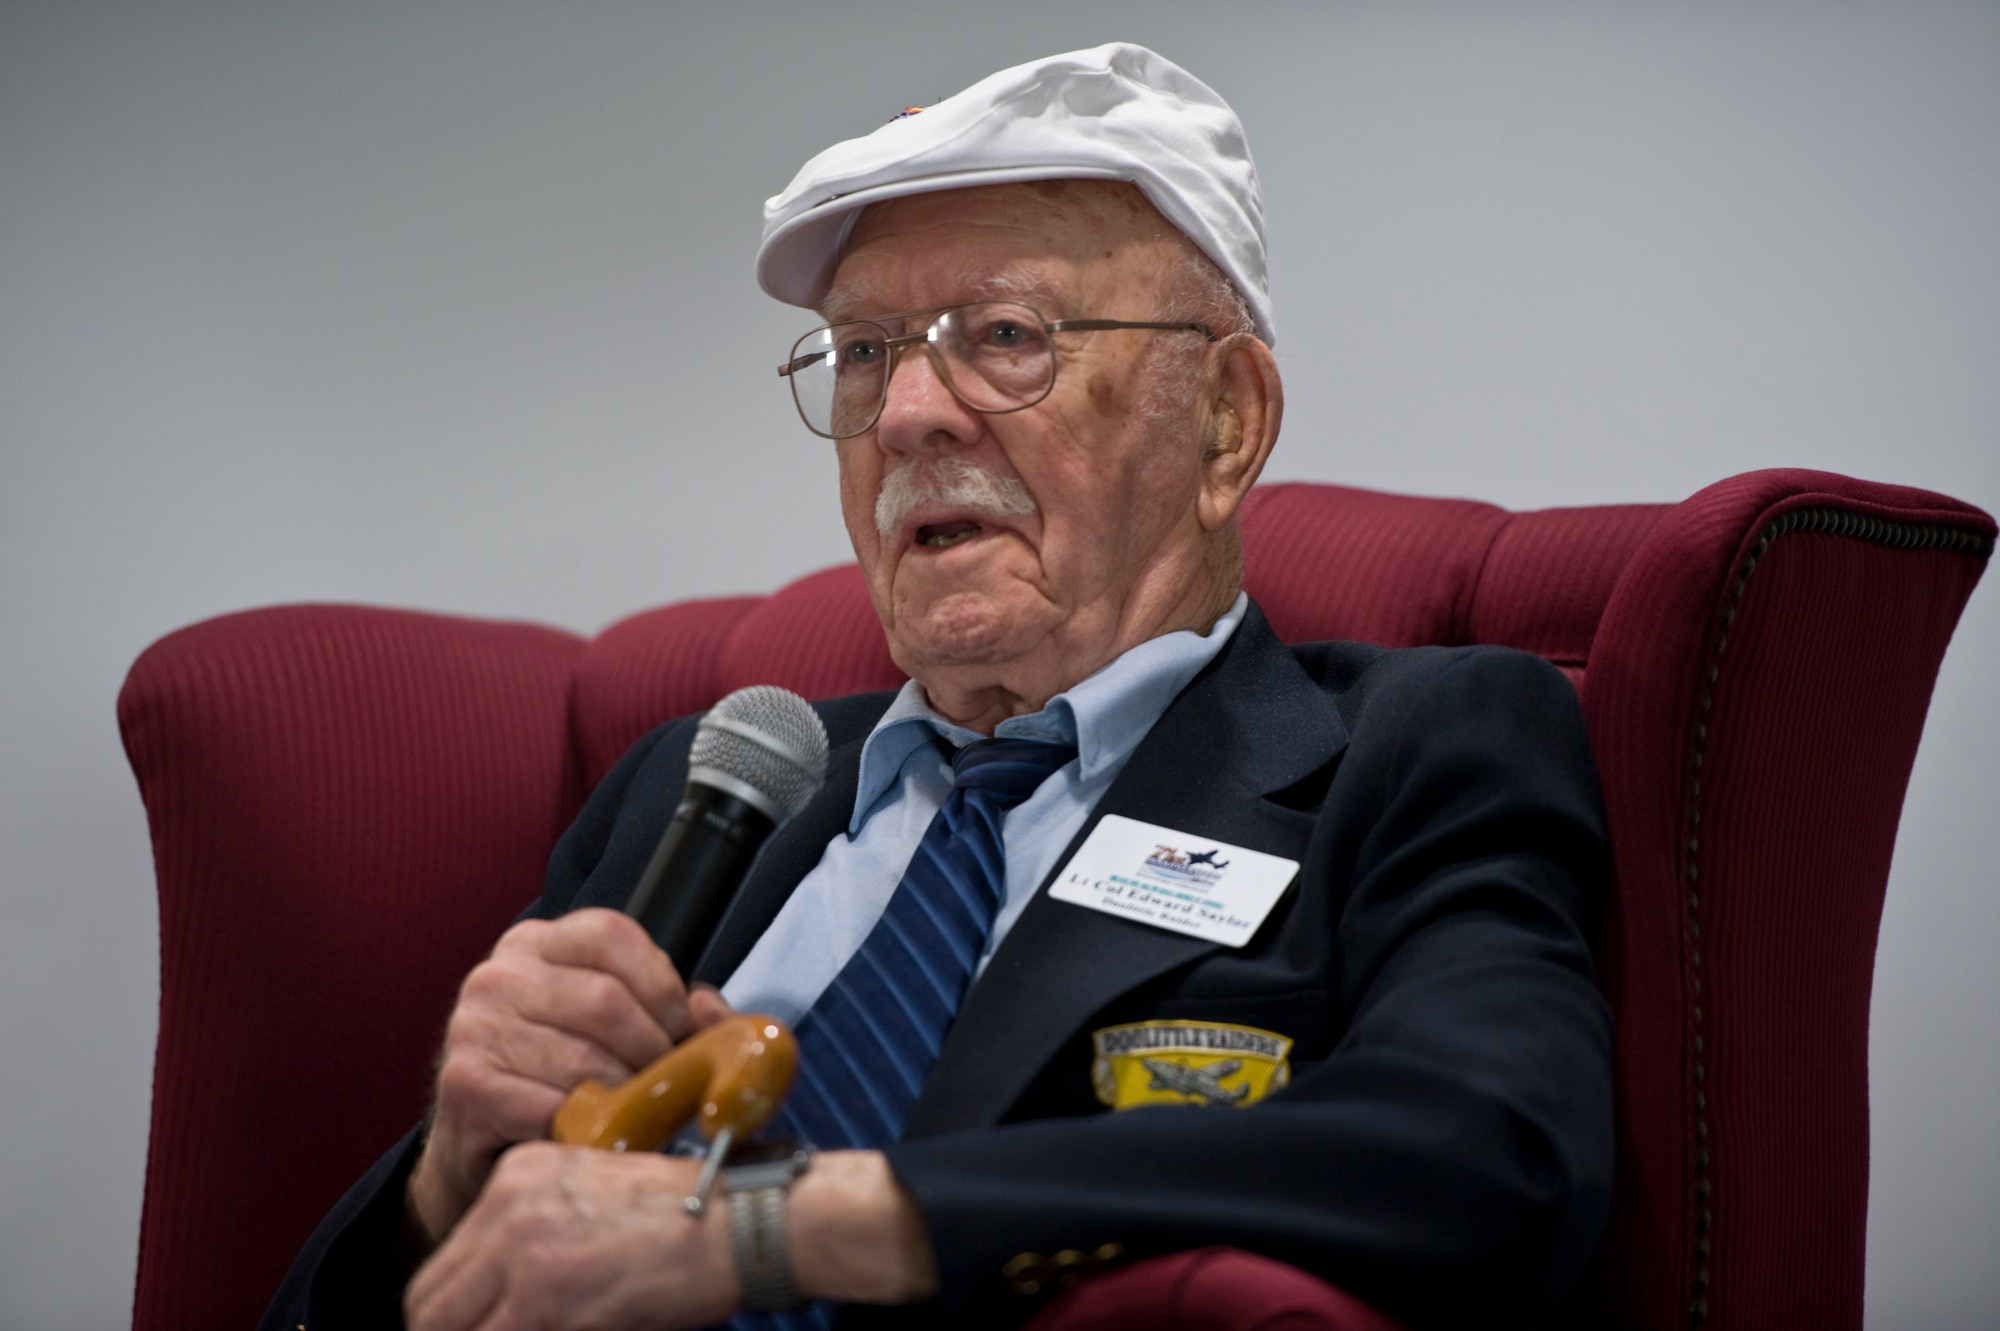 Retired U.S. Air Force Lt. Col Edward Saylor, a surviving member of the Doolittle Raiders, answers questions from Hurlburt Field Airmen at the 319th Special Operations Squadron auditorium at Hurlburt Field, Fla., April 18, 2013. The Doolittle Raid was the April 18, 1942 bombing over mainland Japan in response to the attack on Pearl Harbor. (U.S. Air Force photo/Airman 1st Class Hayden K. Hyatt)